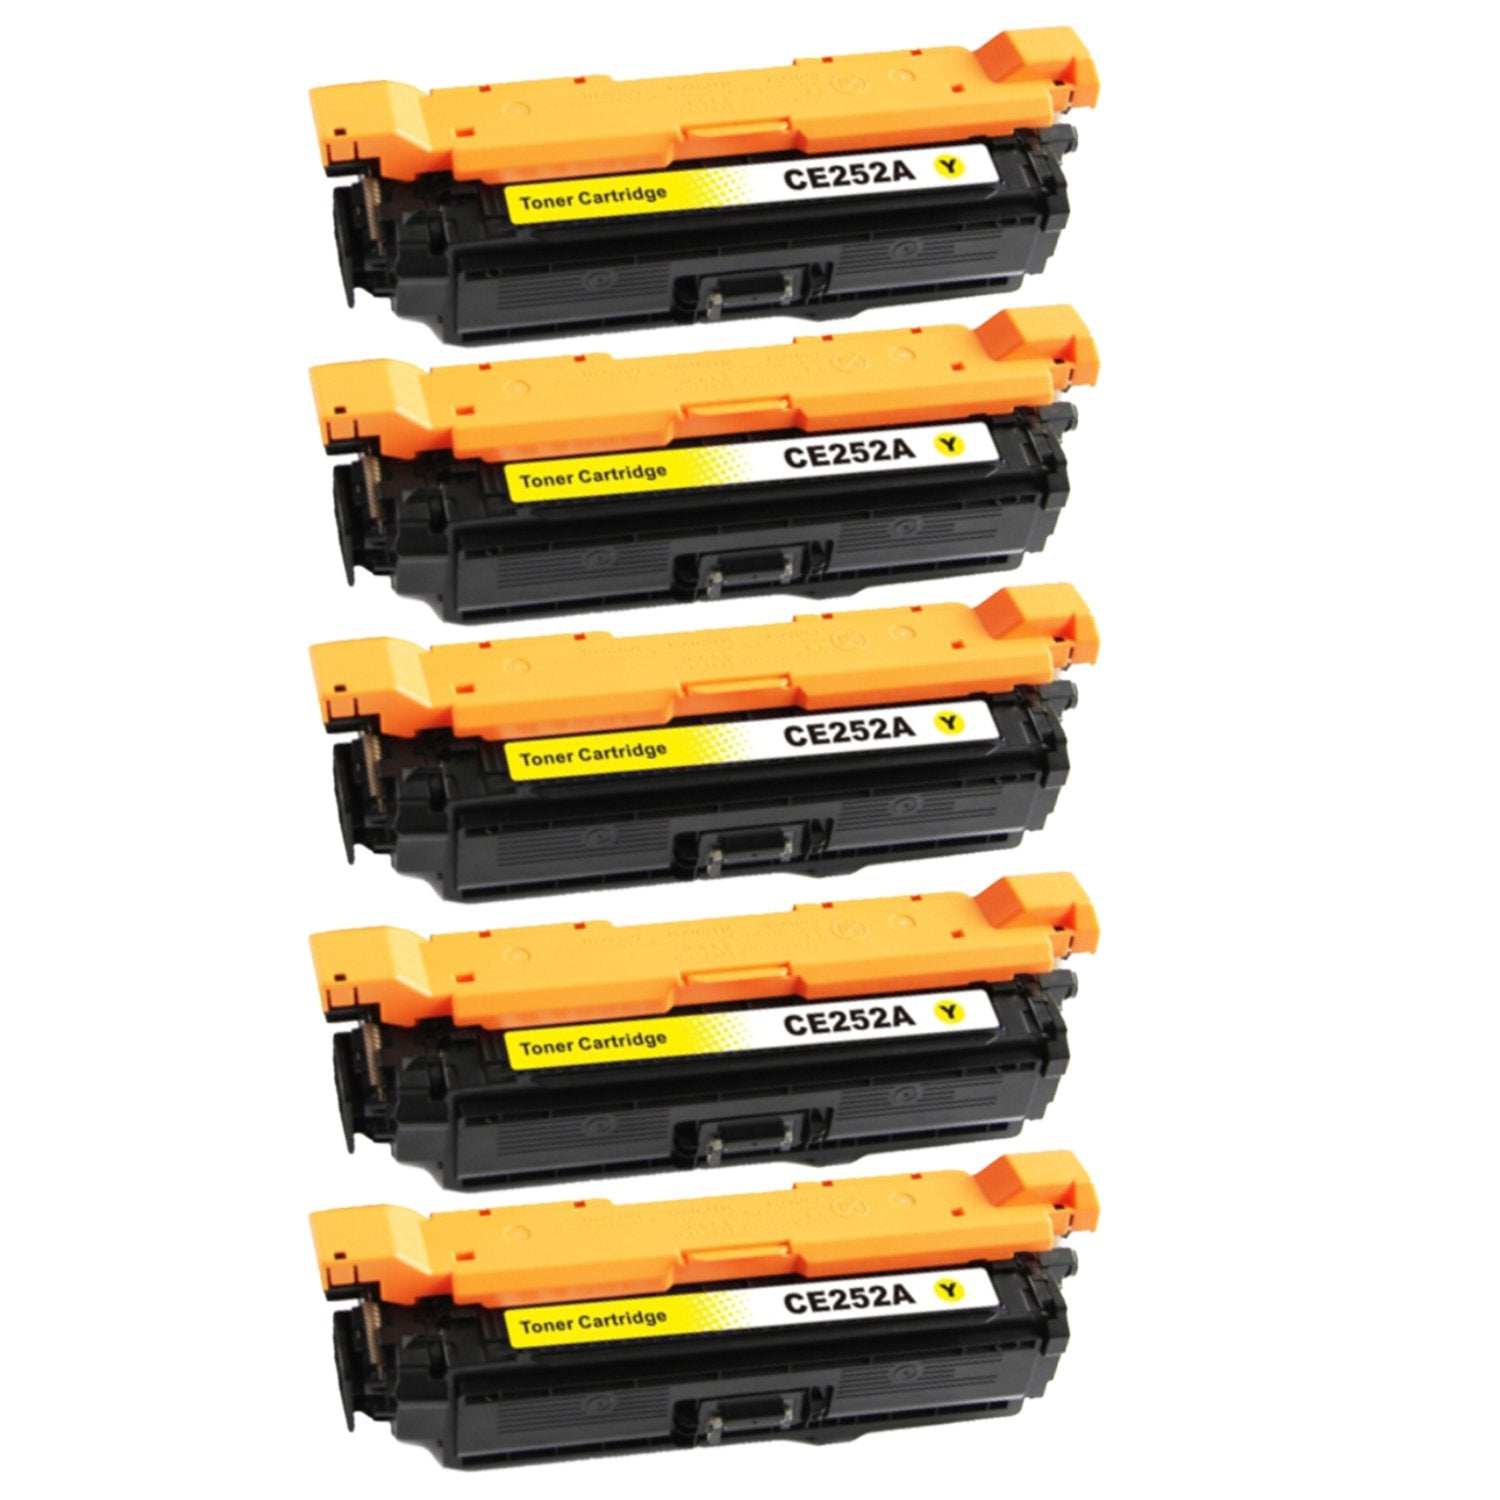 Absolute Toner Compatible CE252A HP 504A Yellow Toner Cartridge | Absolute Toner HP Toner Cartridges